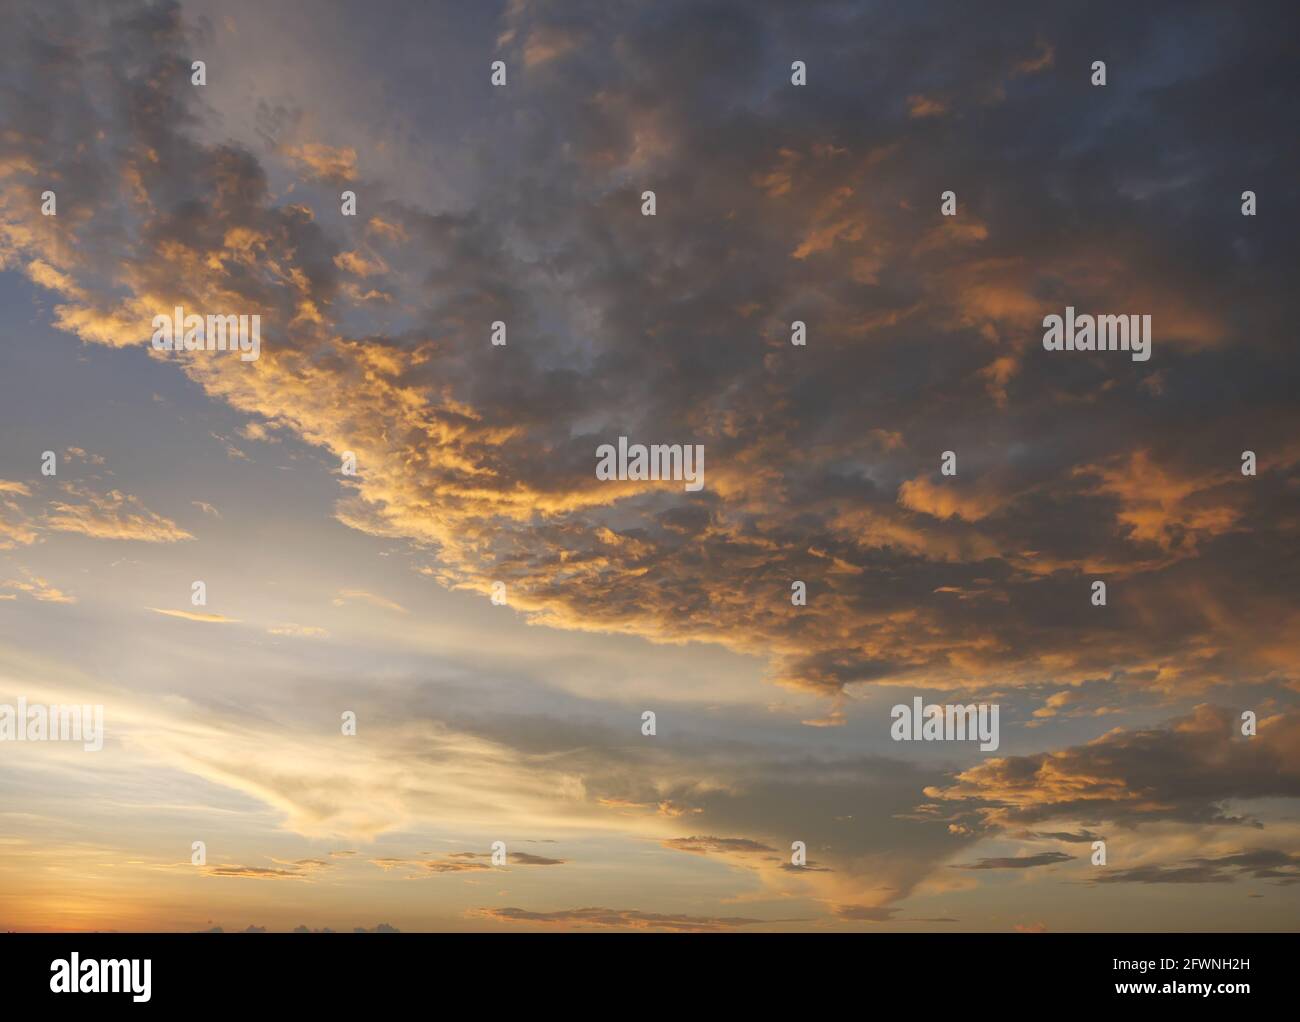 Gold color cloud and blue sky in magic hour at sunset, The horizon began to turn orange with purple clouds at night, Dramatic cloudscape area Stock Photo